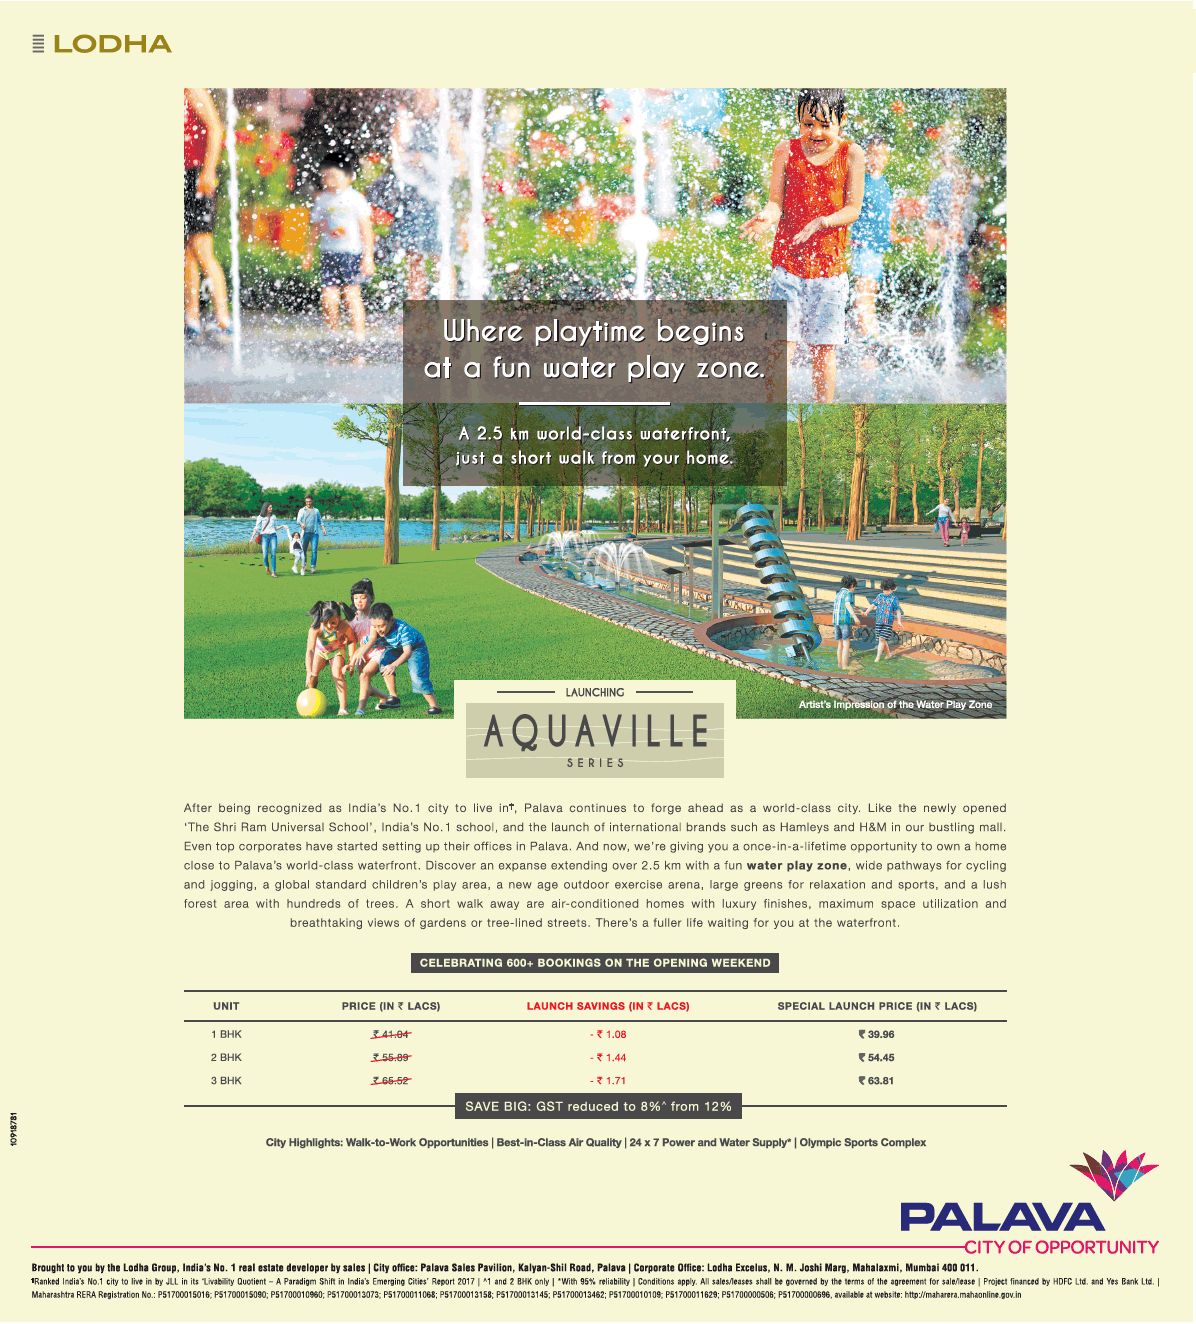 Take a short walk from your home in world-class waterfront at Lodha Palava Aquaville in Mumbai Update